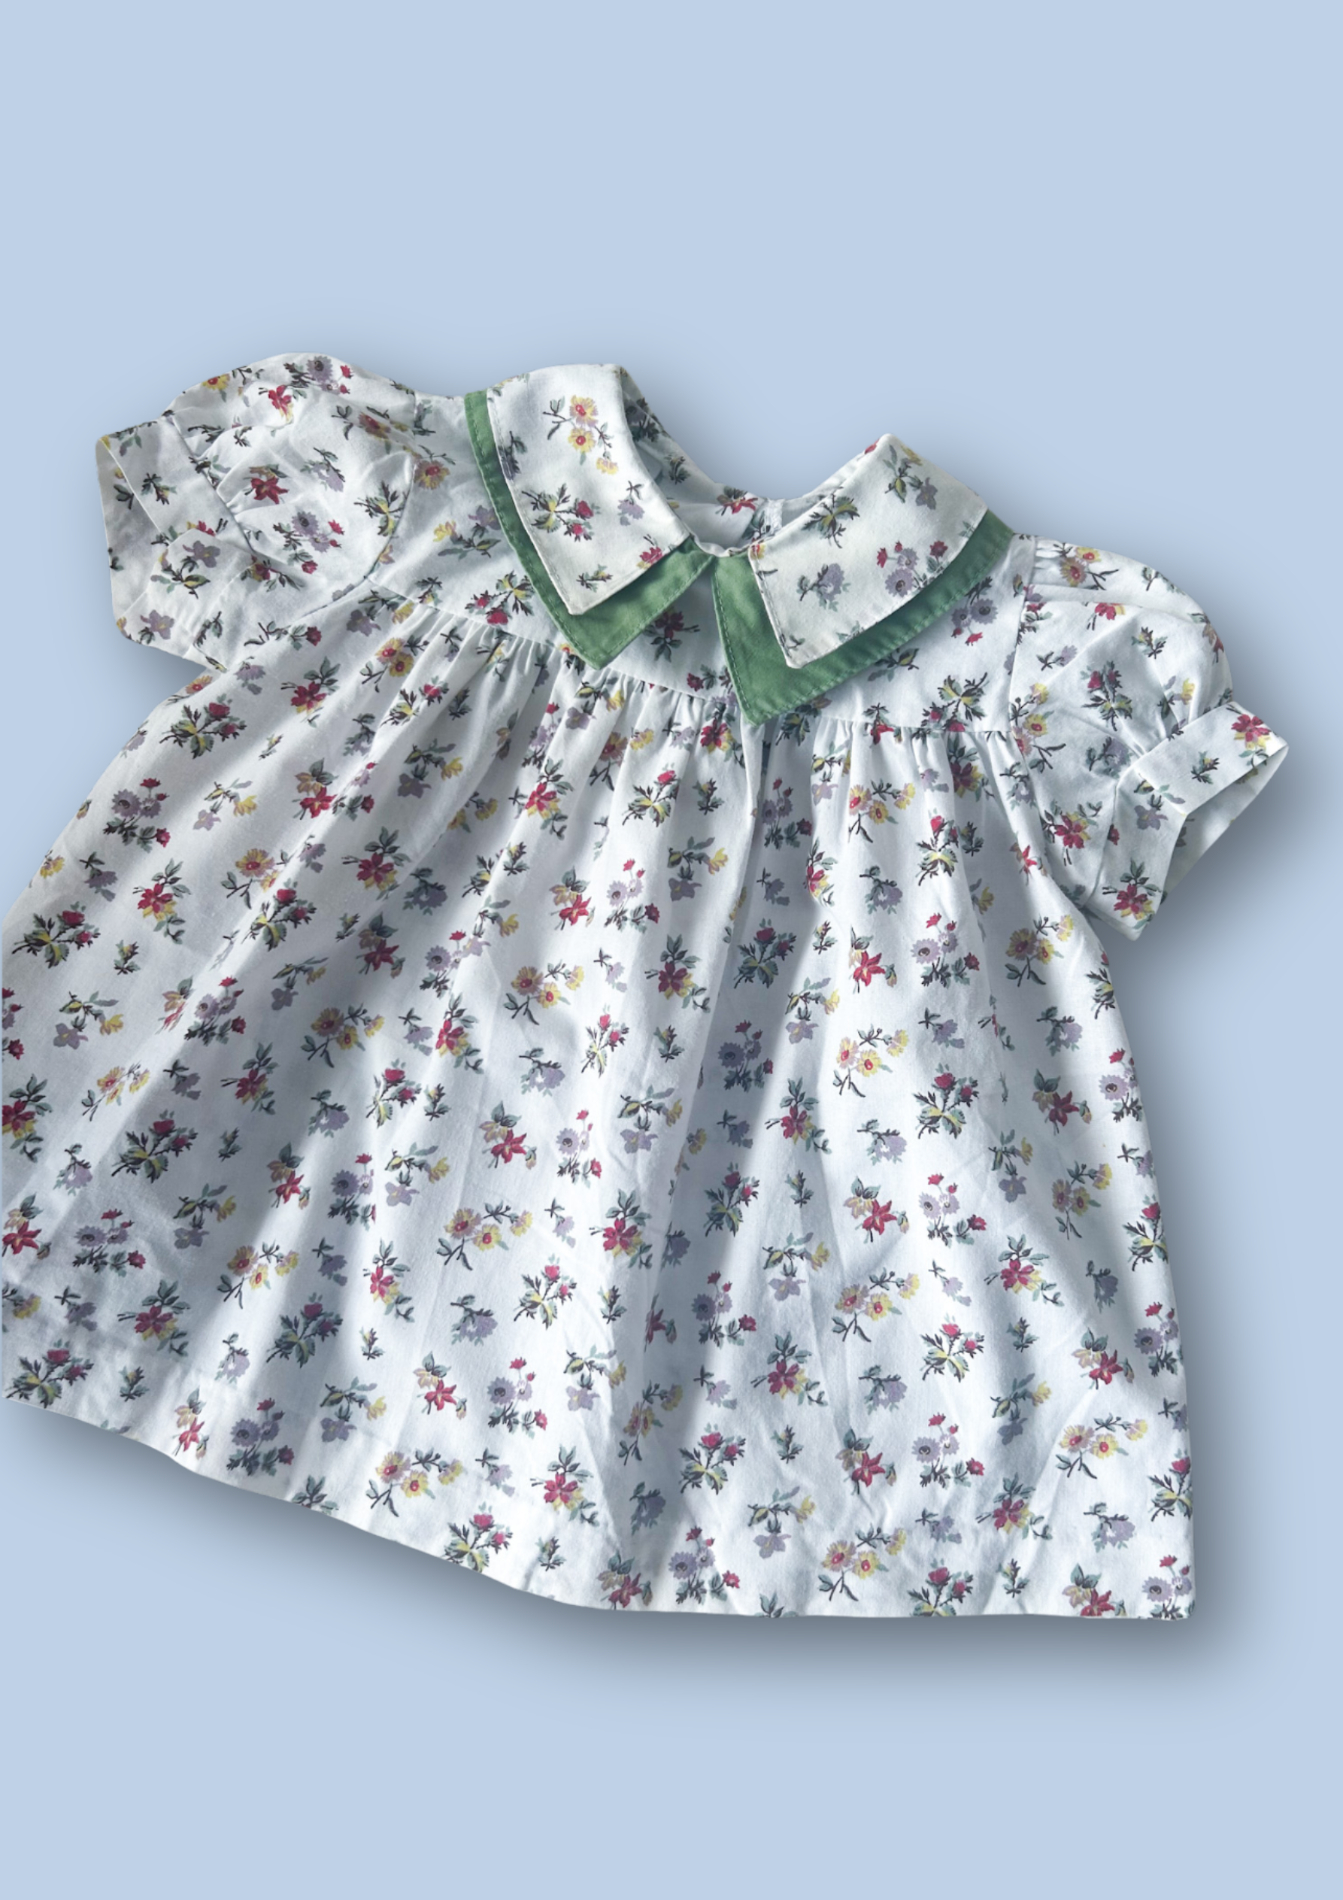 Vintage Blouse & Bloomers Set, approx 6-9 months